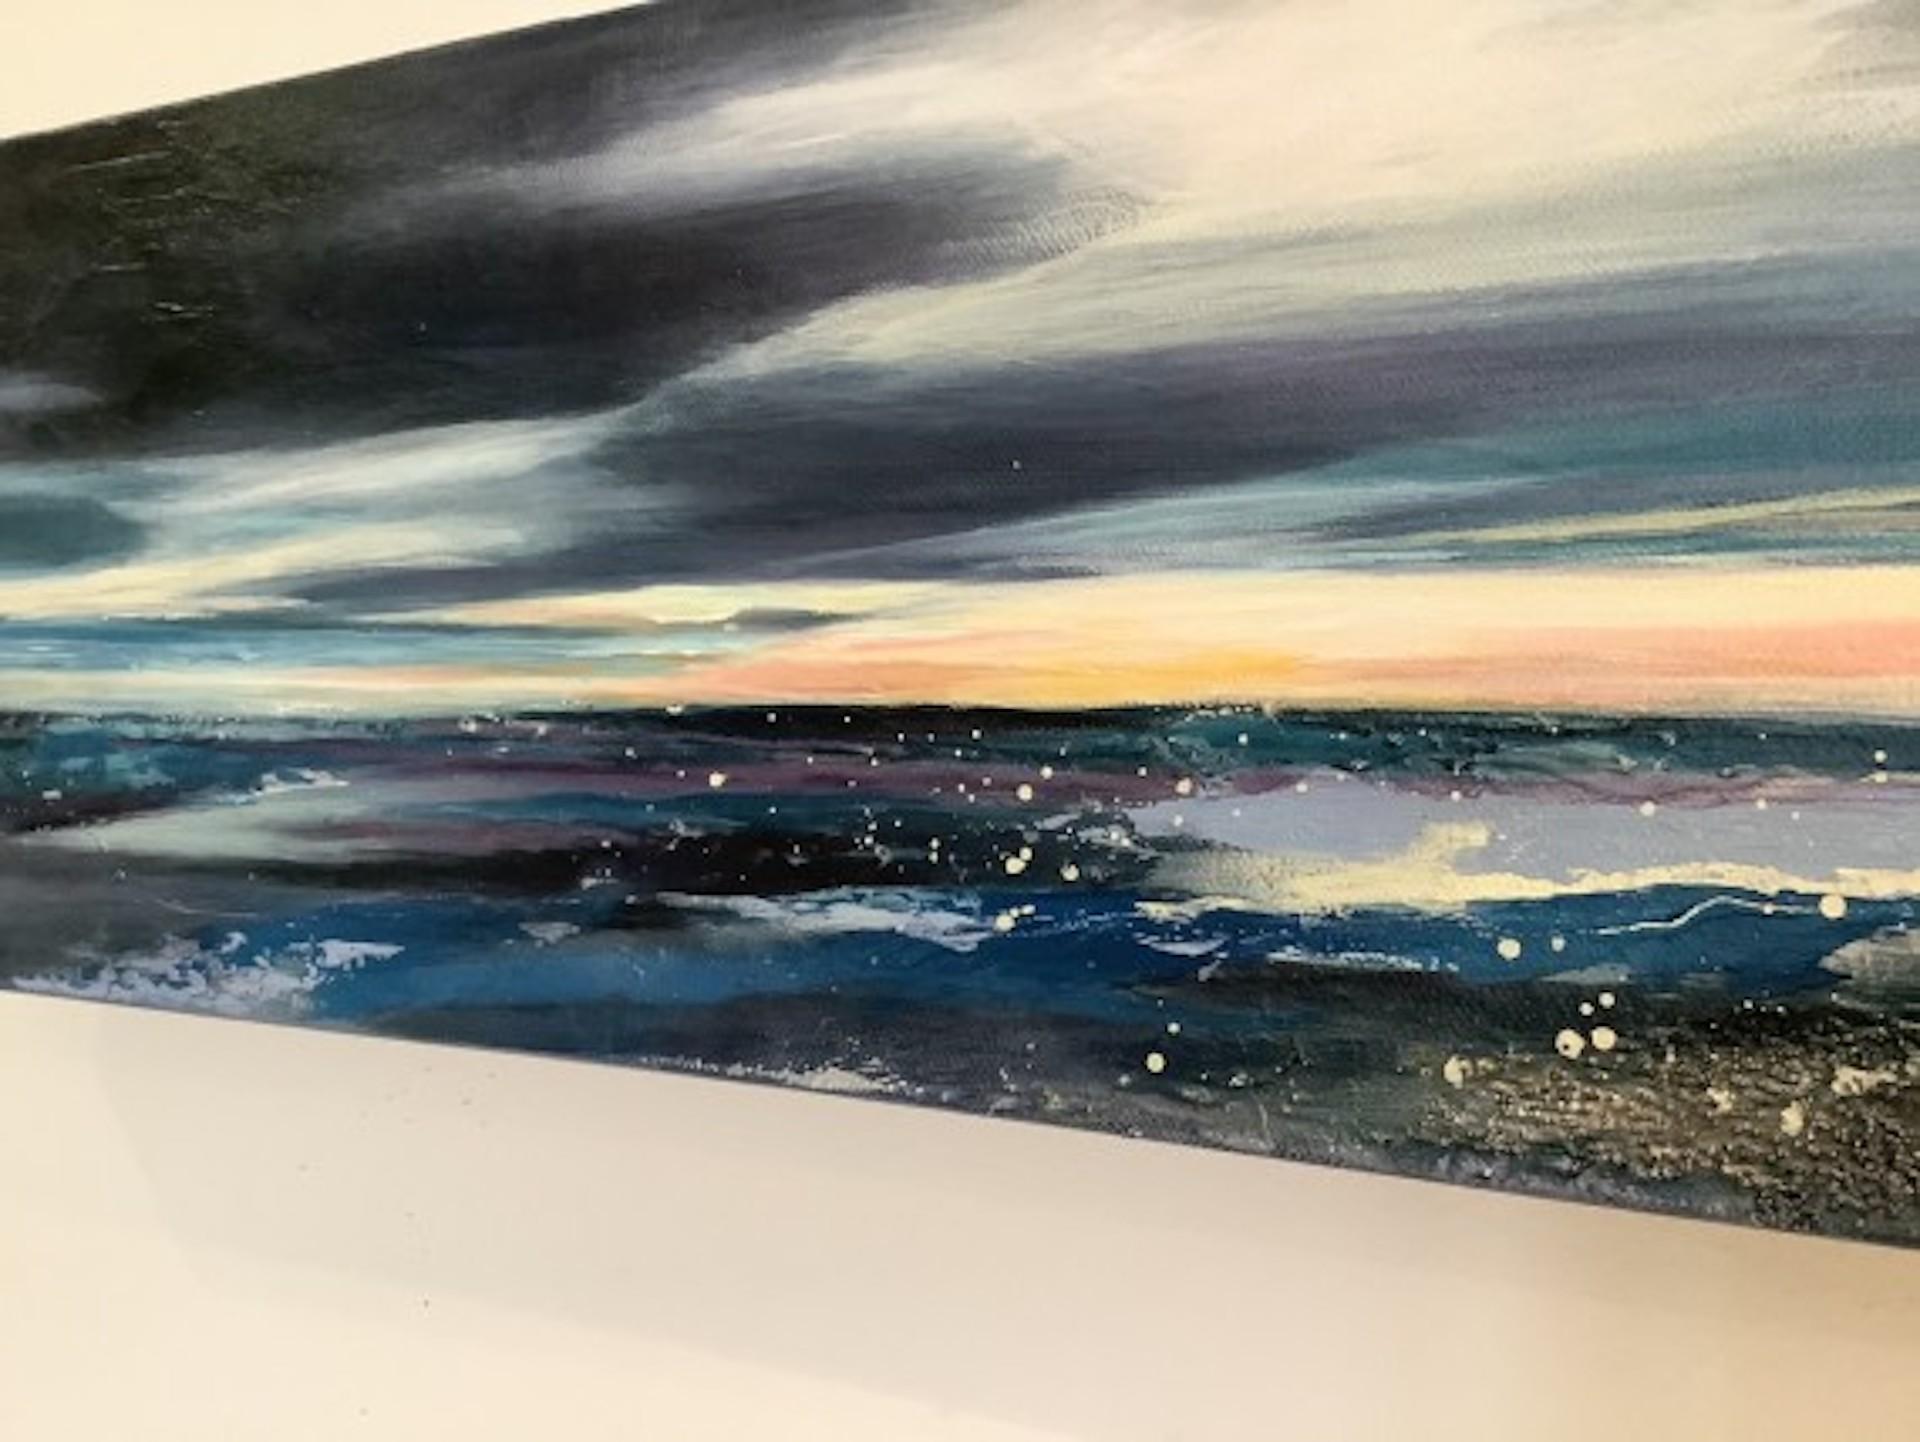 The Last Light. Adele Riley Artist [2021]
Original
Seascapes
Acrylic and acrylic inks on boxed canvas
Canvas Size: H:20 cm x W:50 cm x D:4cm
Sold Unframed
Please note that insitu images are purely an indication of how a piece may look

The last